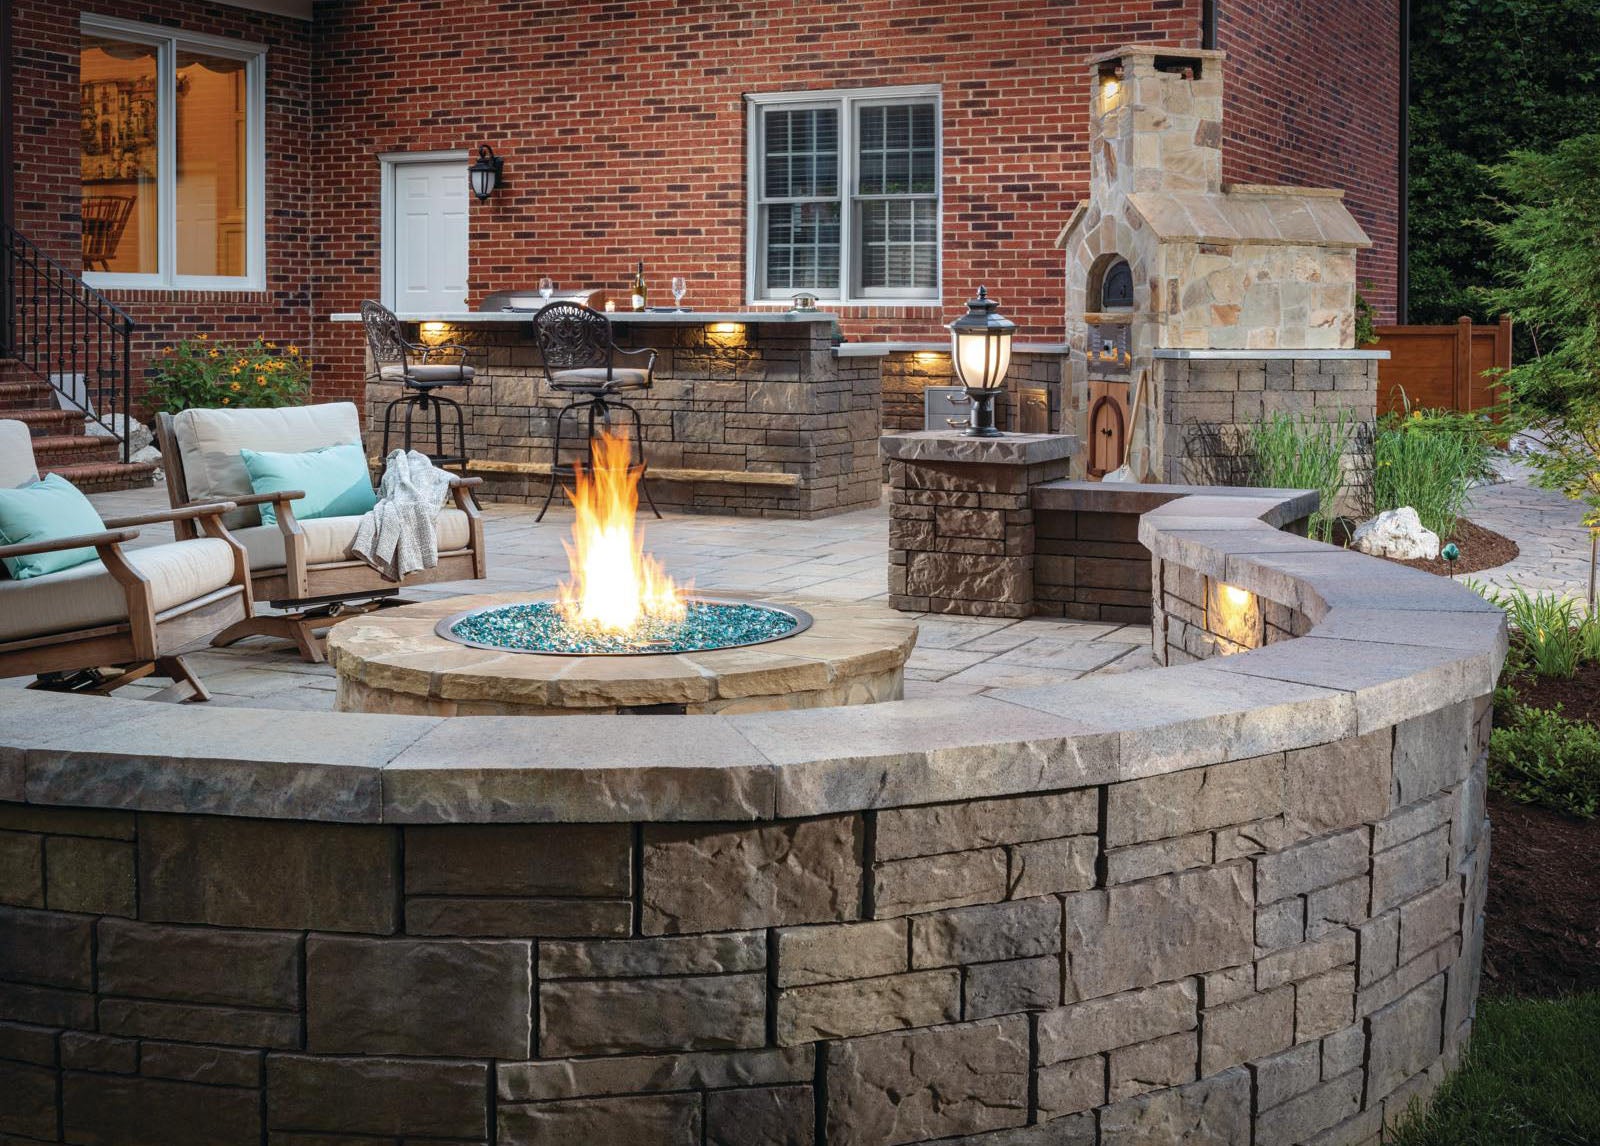 Designing A Patio Around Fire Pit, Backyard Gas Fire Pit Ideas